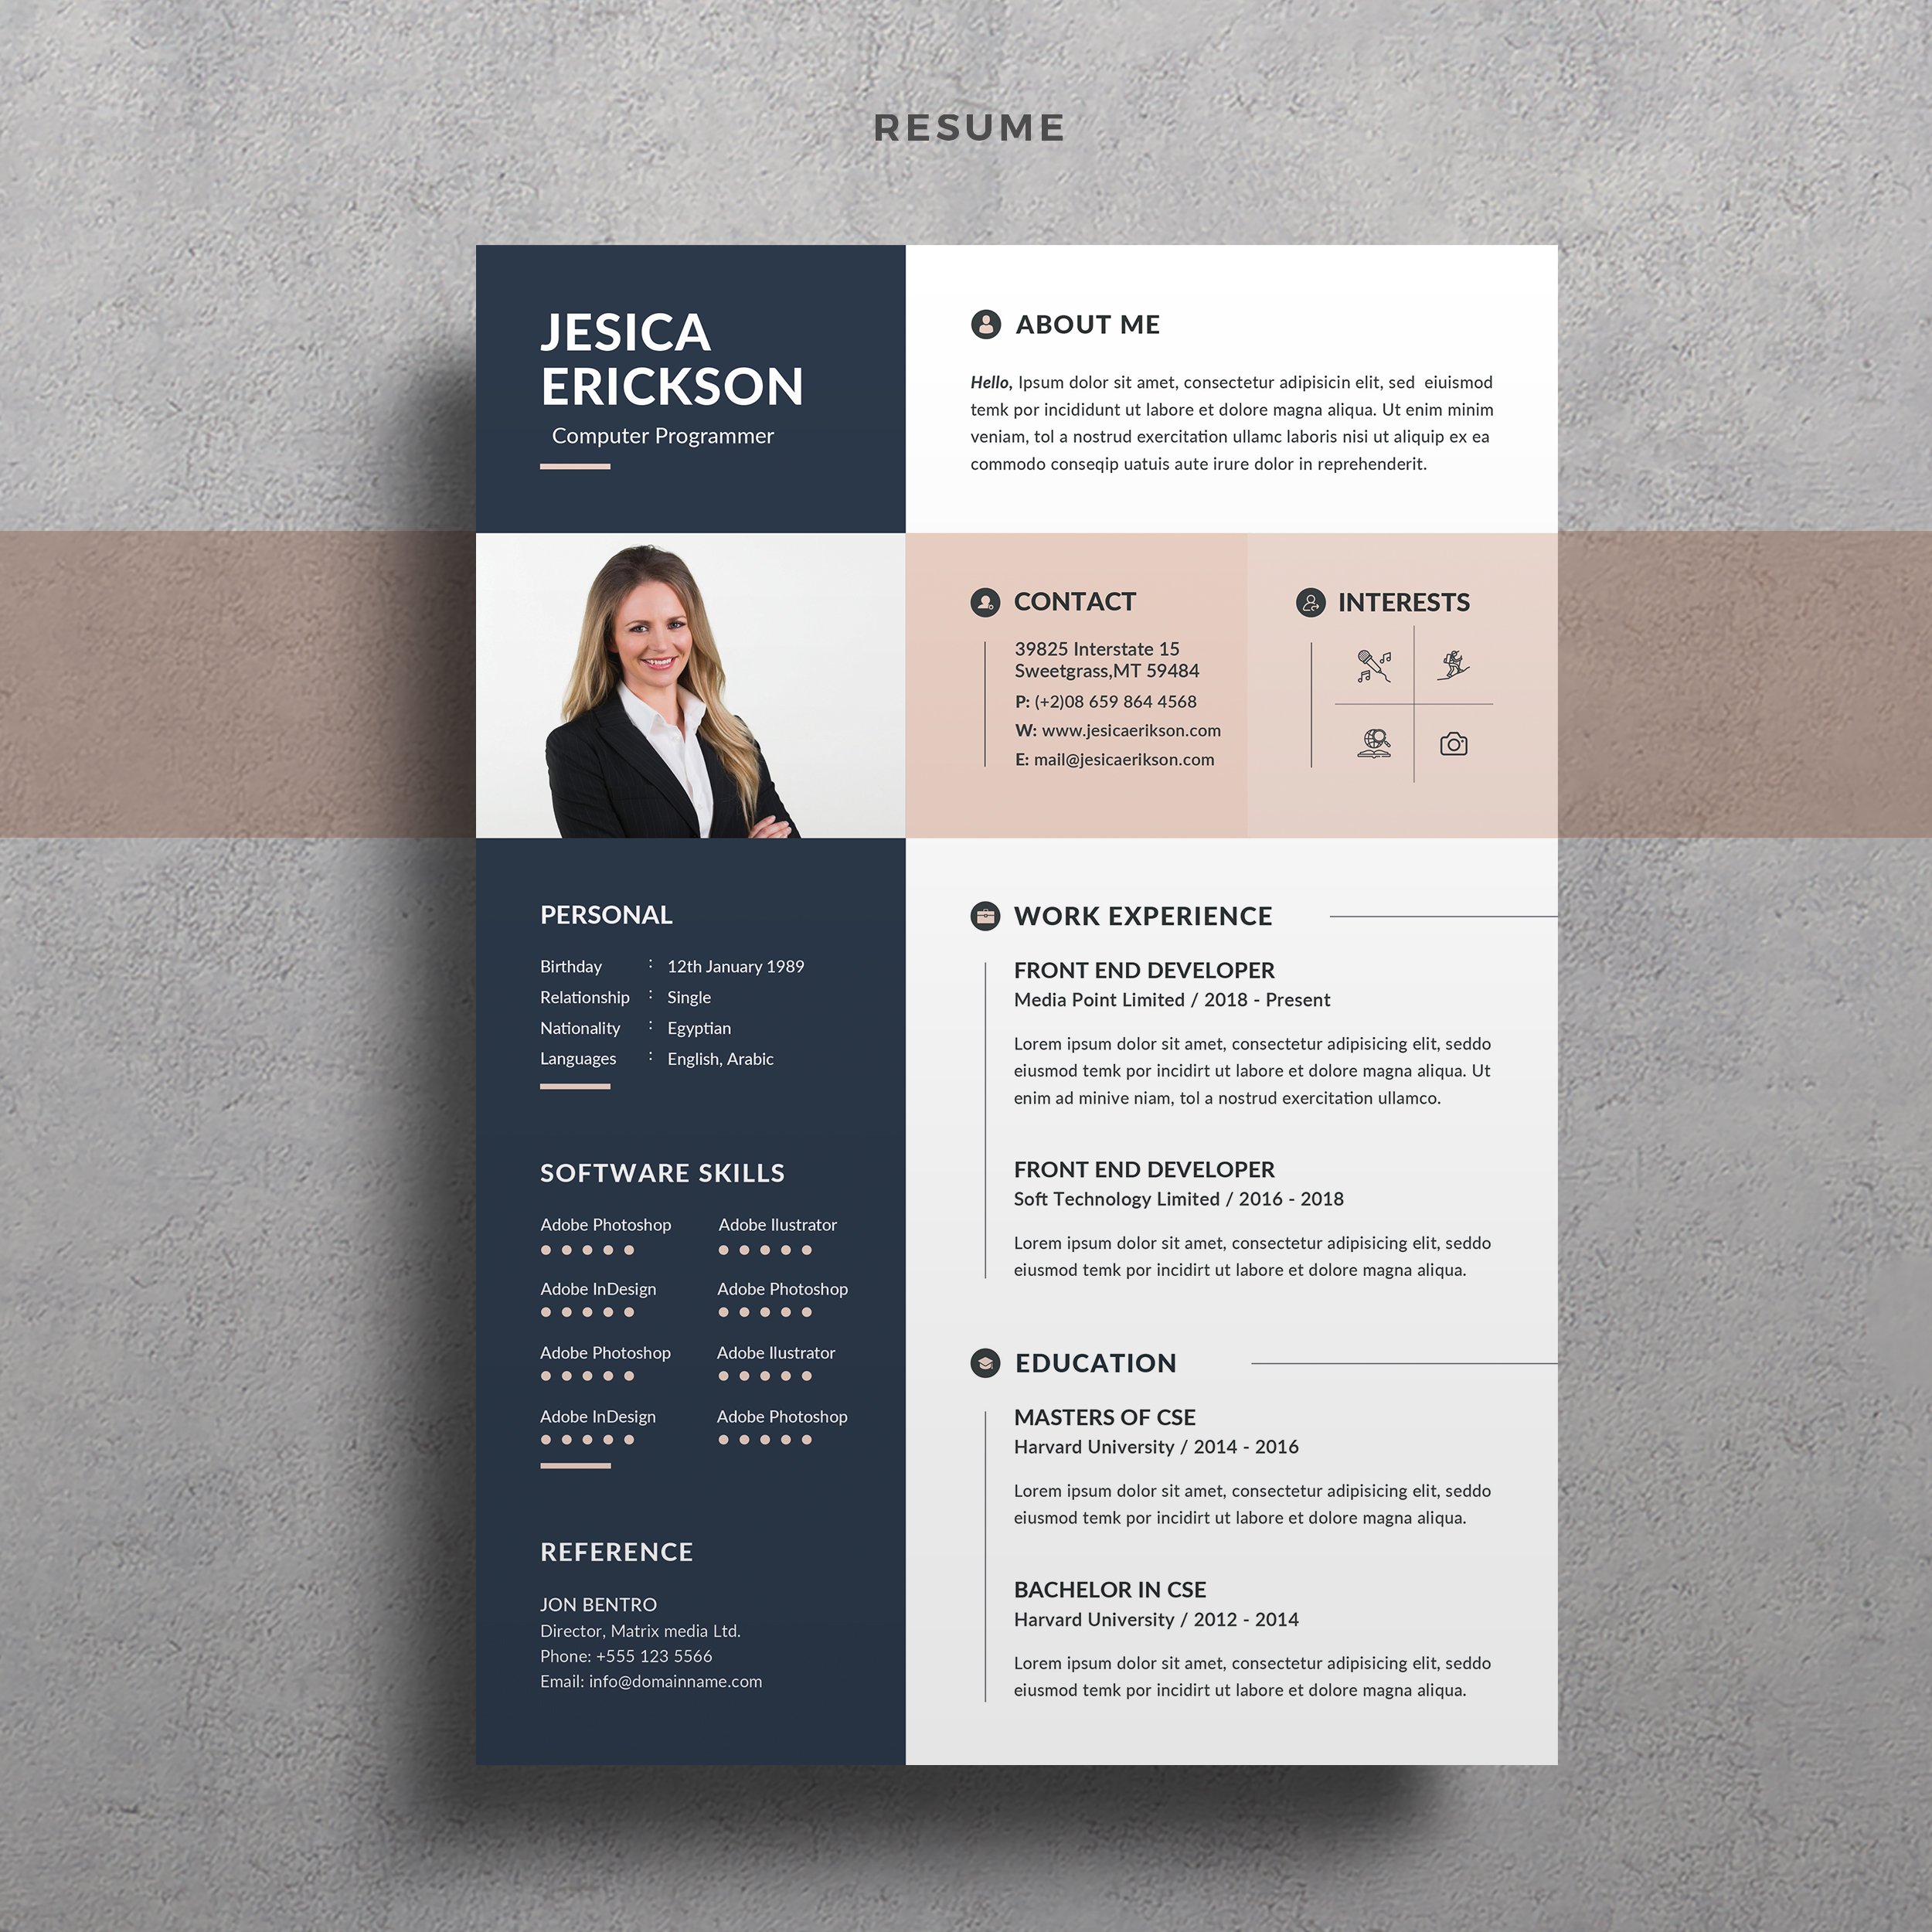 Professional resume template with a blue and pink color scheme.